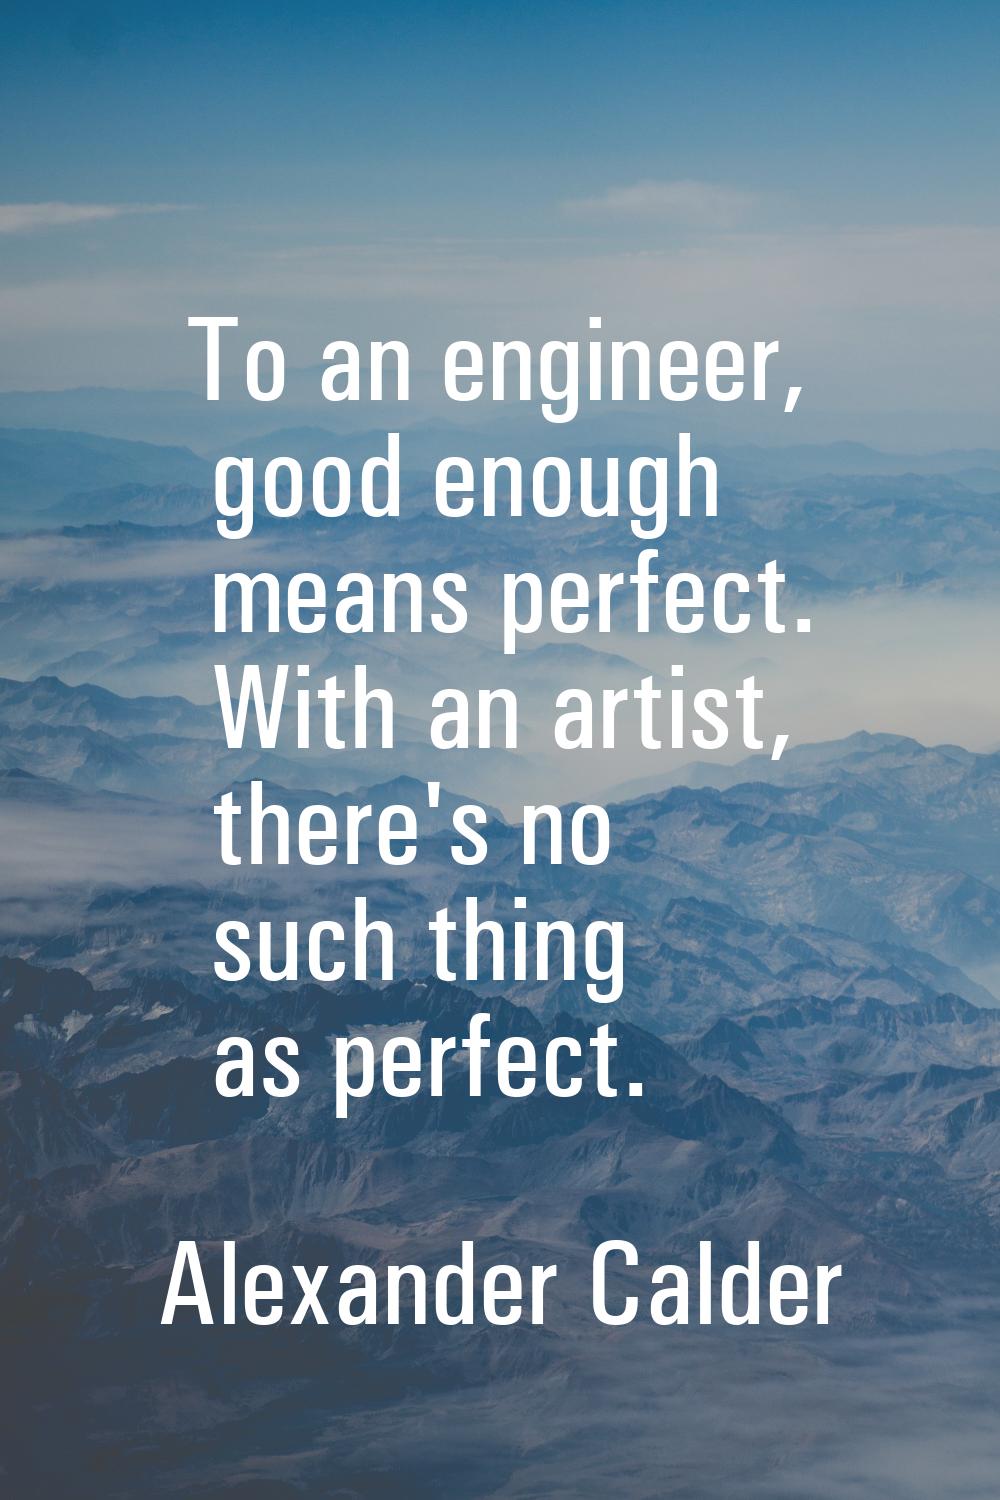 To an engineer, good enough means perfect. With an artist, there's no such thing as perfect.